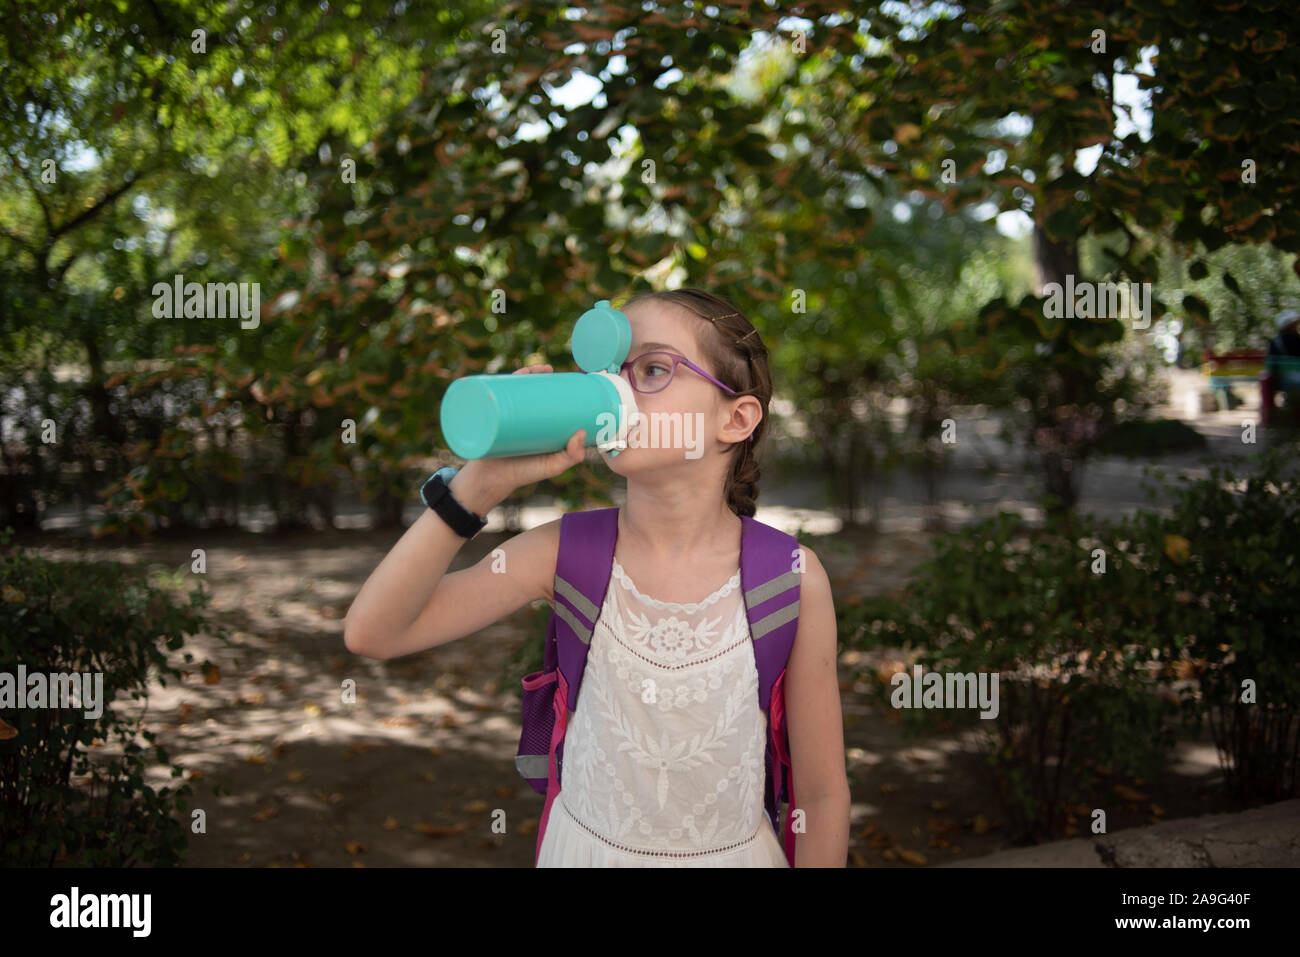 girl with cup. schoolgirl girl in glasses drinks water from a thermos or thermomug.A schoolgirl drinks tea, juice or water from a thermal cup or therm Stock Photo